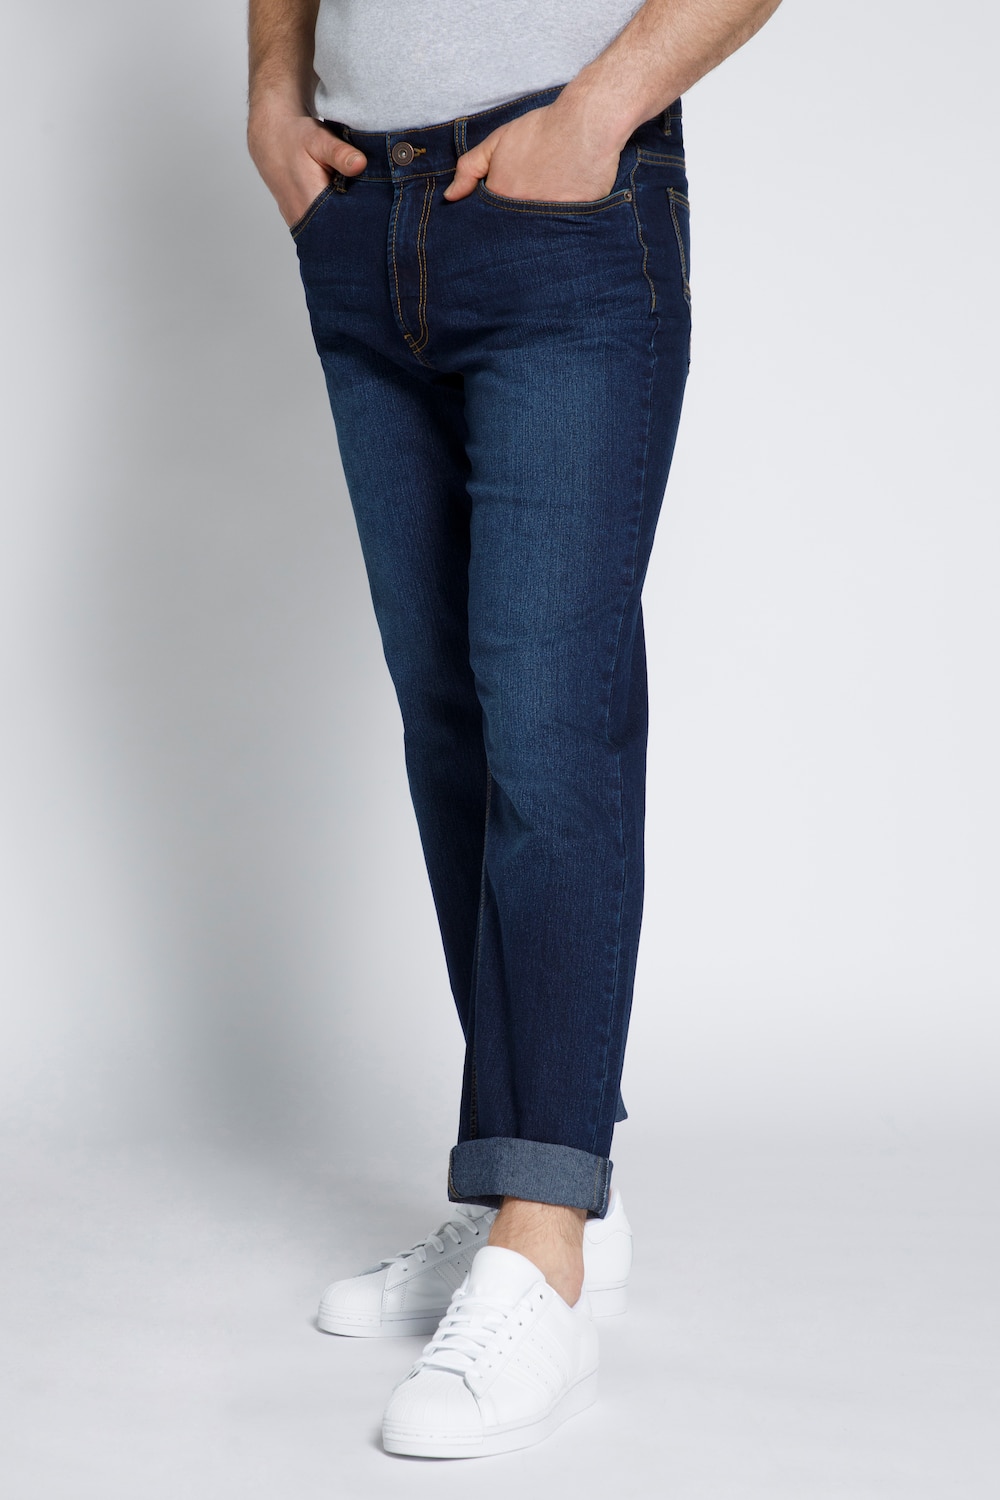 grandes tailles jean sthuge, femmes, bleu, taille: 60, coton/polyester, sthuge